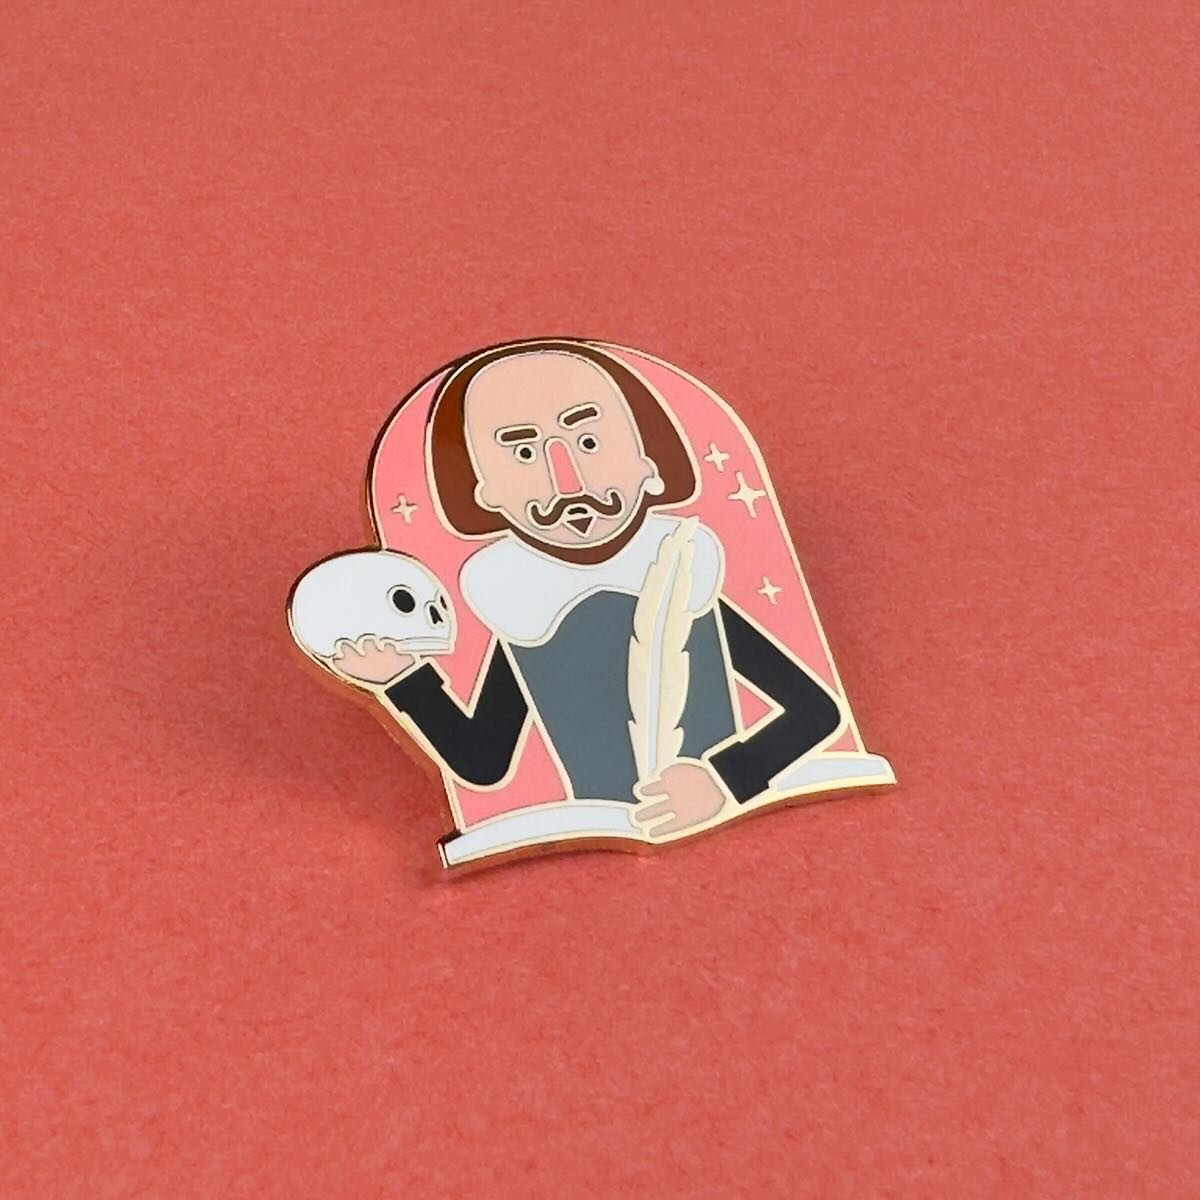 All that glisters is not gold ✨ 

#shakespeare #enamelpin #illustration #london